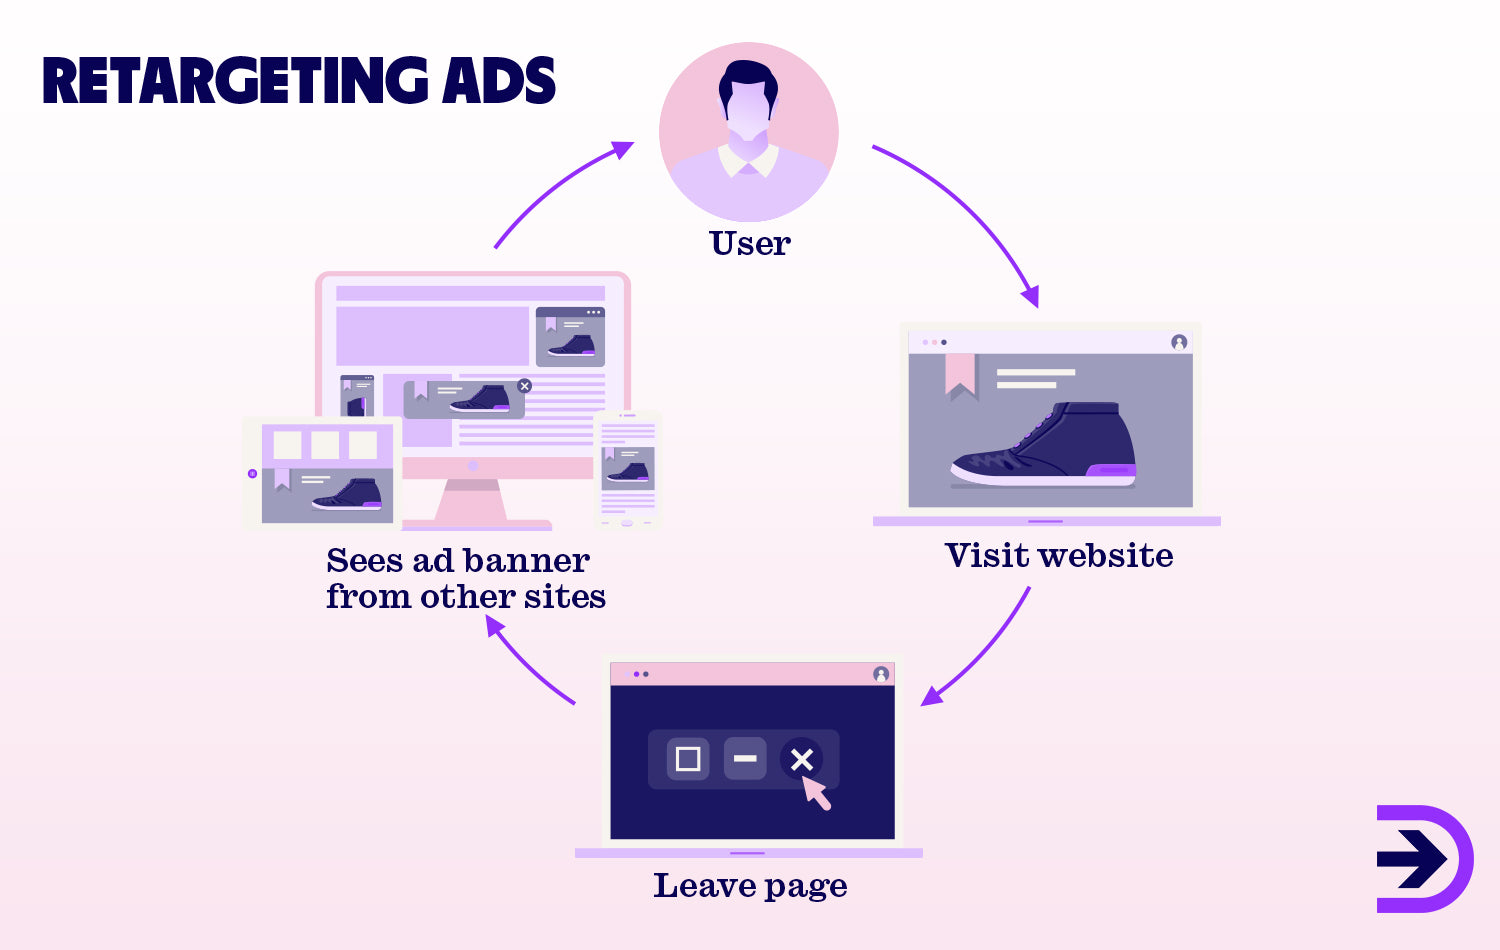 Retargeting ads use cookies to track and show ads to users who are yet to convert on a product.